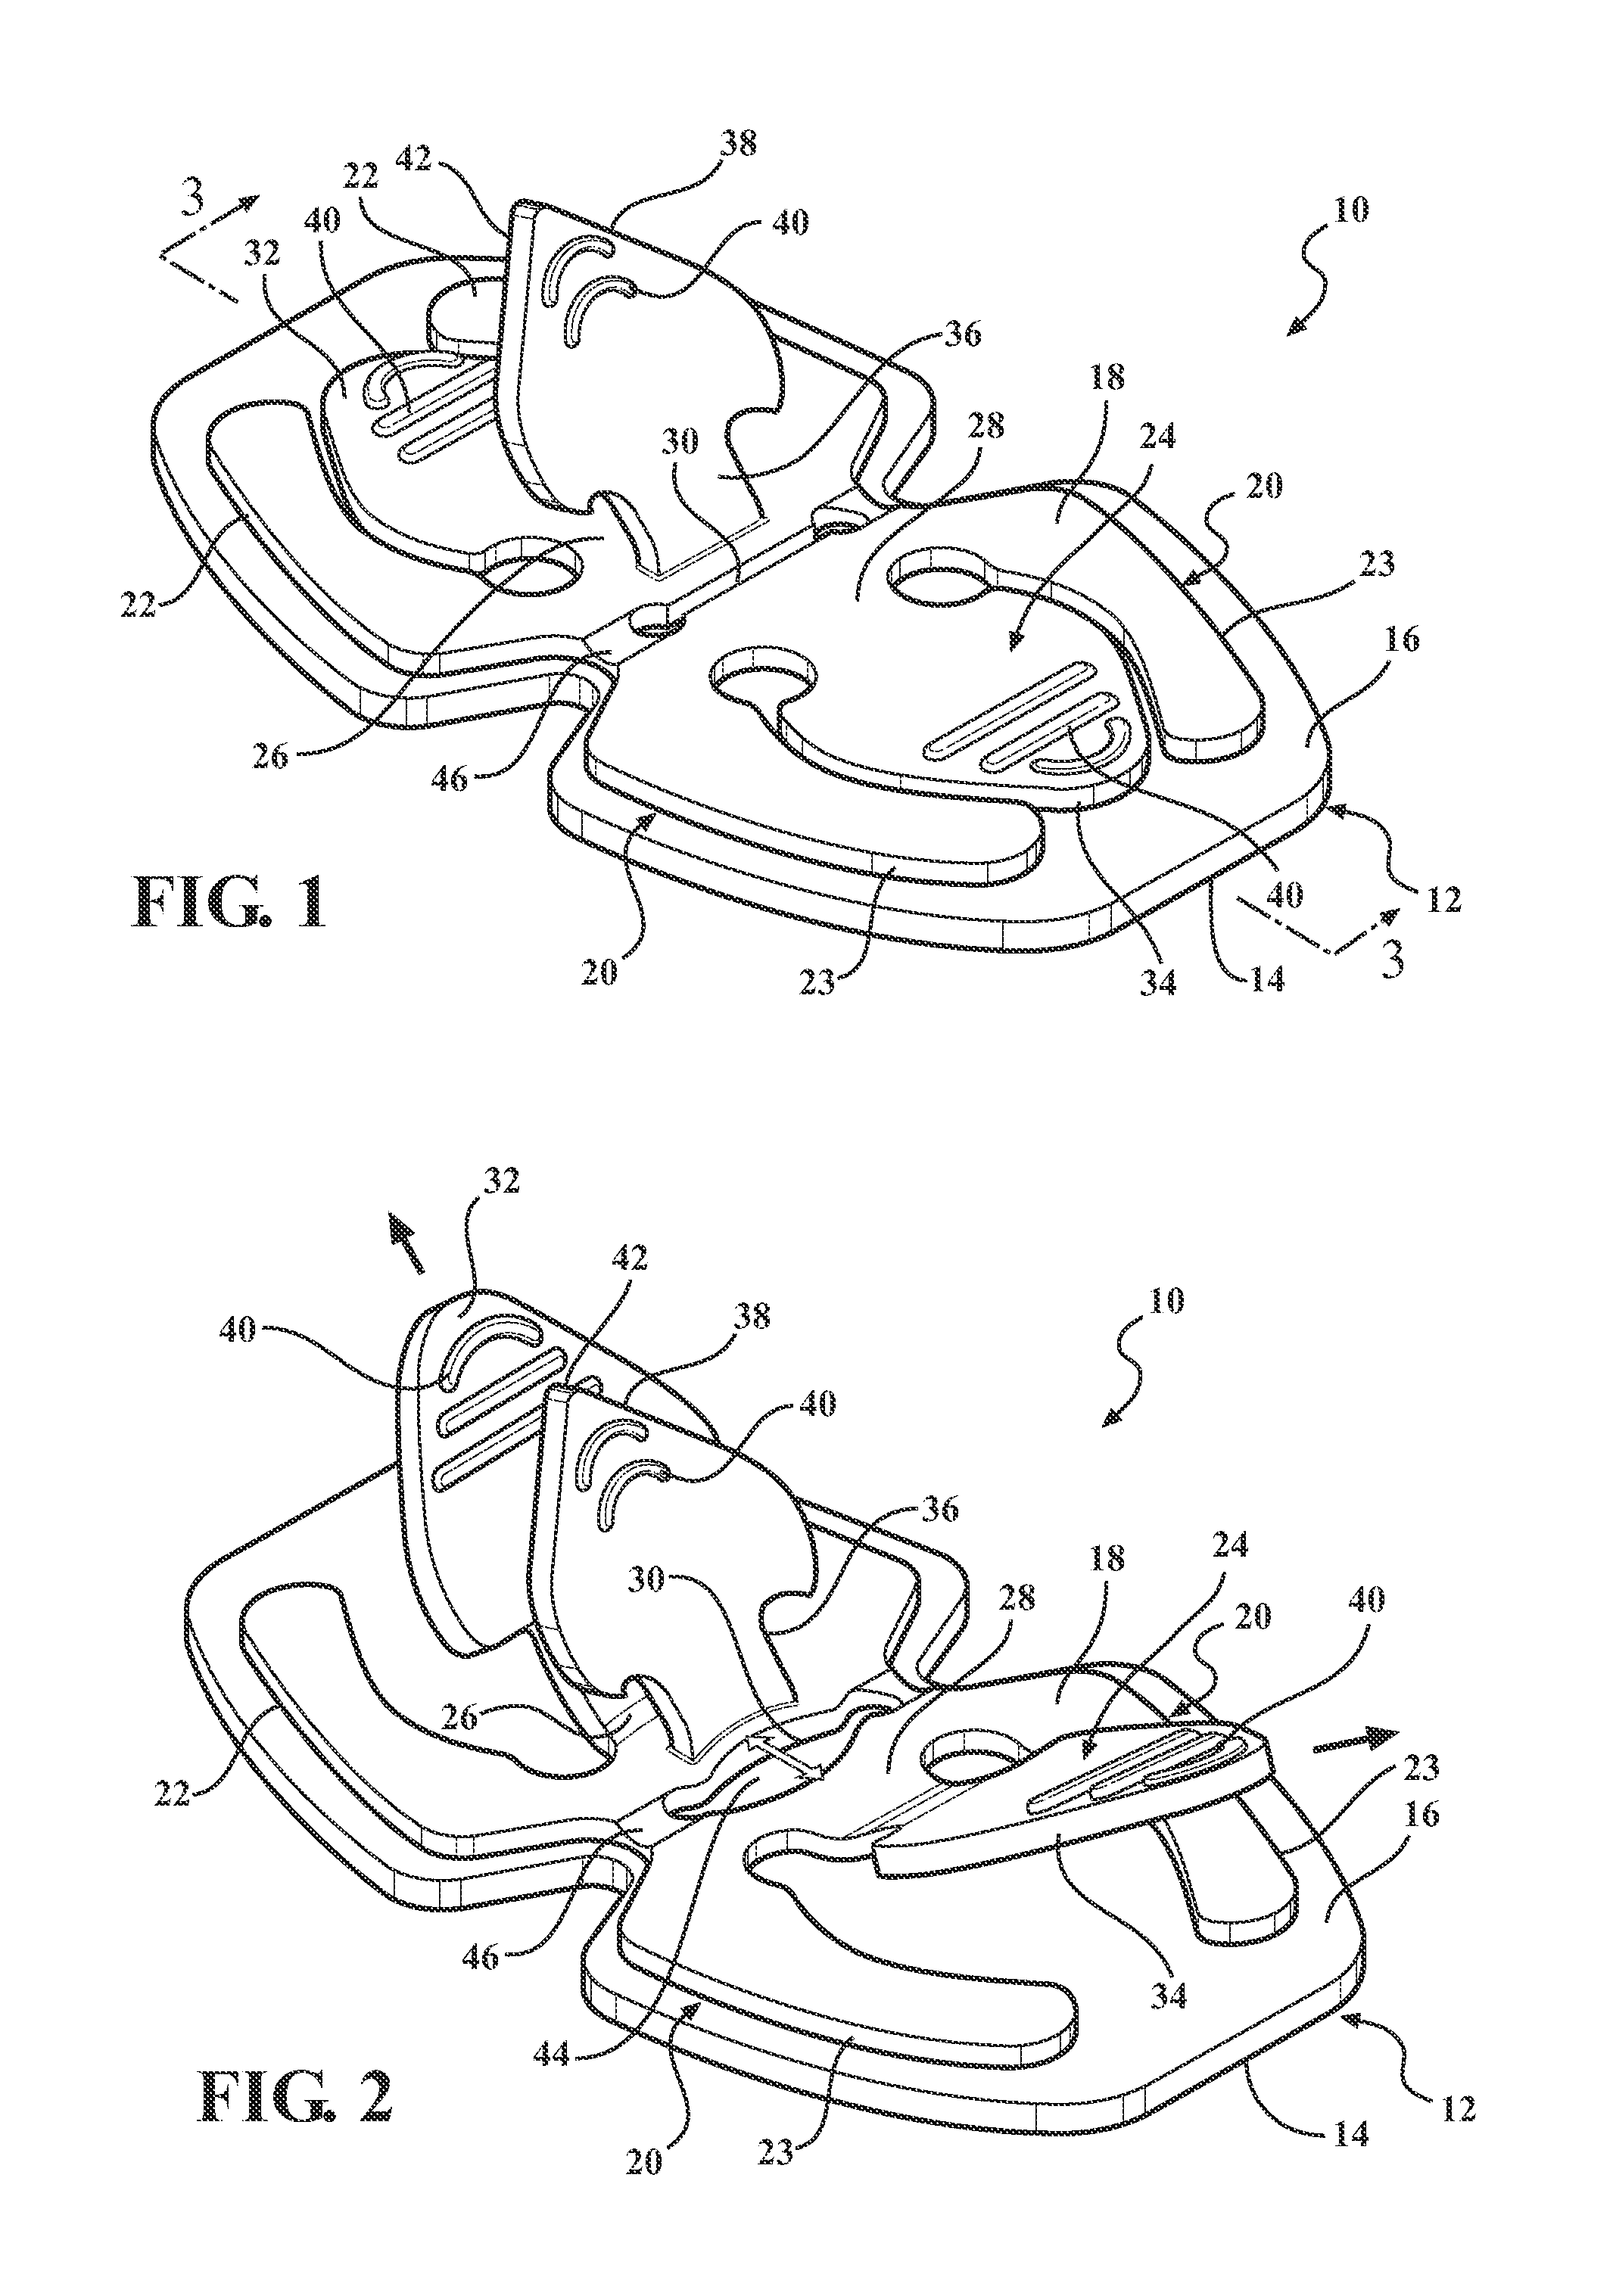 Catheter securement device with slit between first and second pull tabs